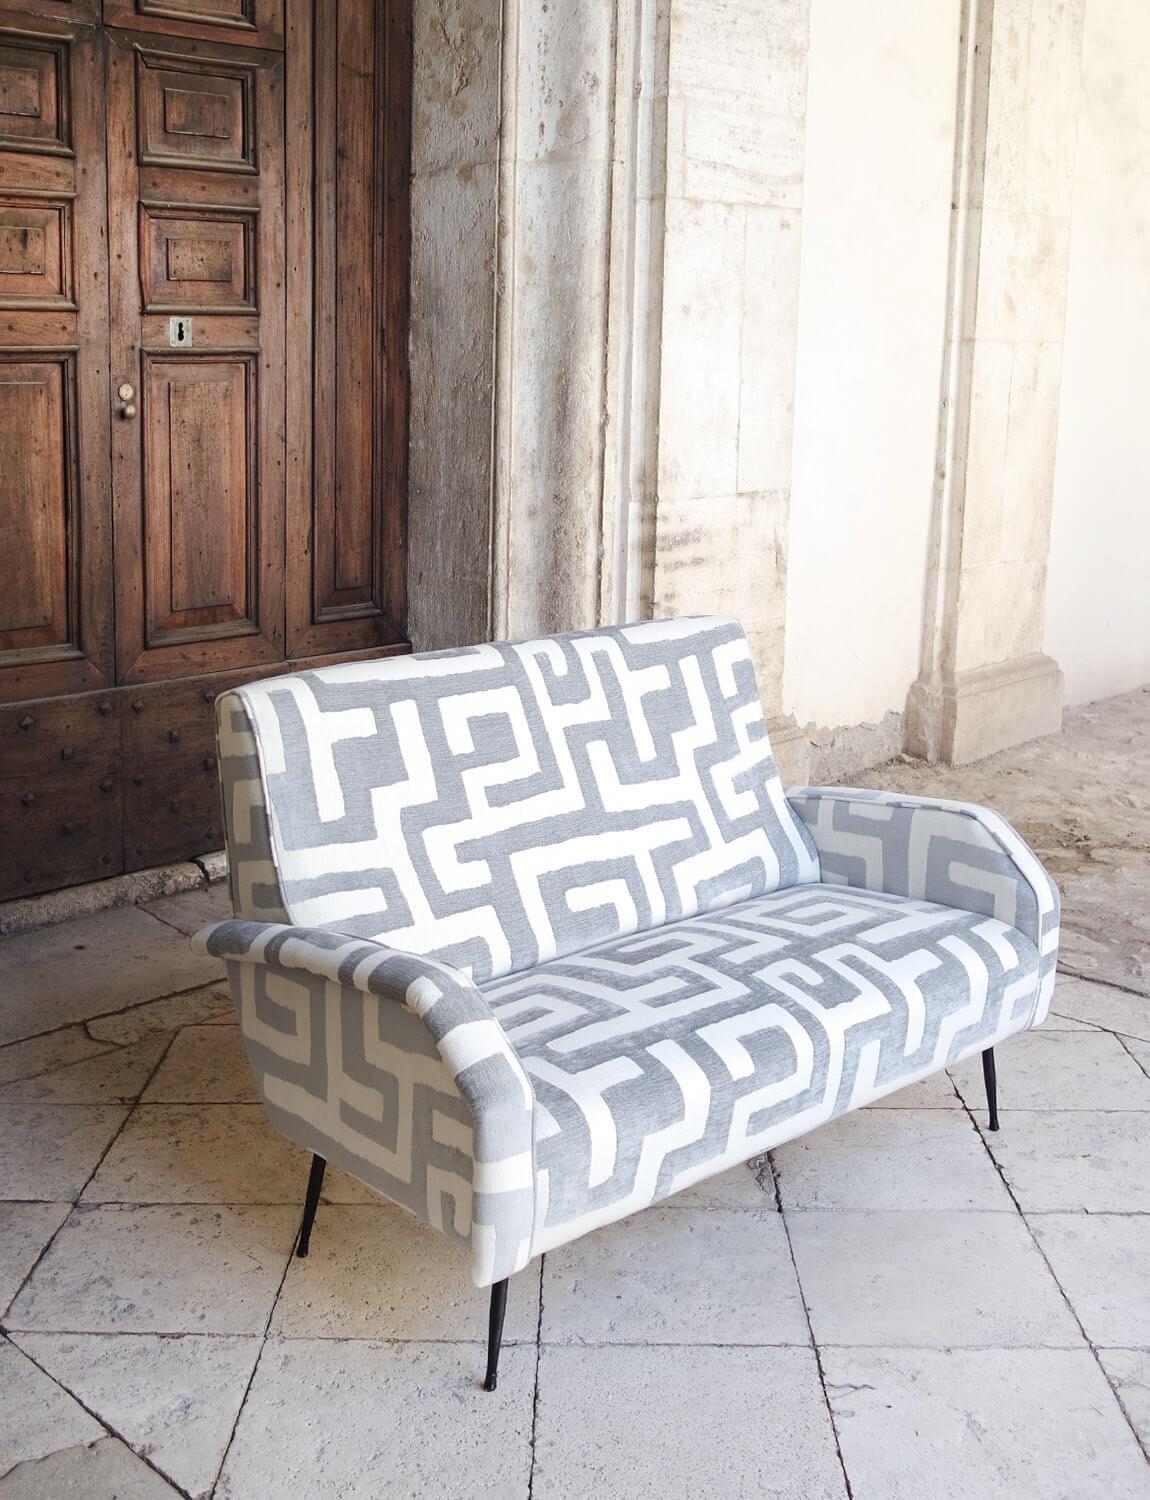 An extremely elegant two seater 1970s Italian sofa which we have reupholstered in Dedar grey and cream wool and silk fabric. The sofa was found in a market in Pisa and restored by Giorgio and Paolo, our expert upholsterers in Umbria, with this